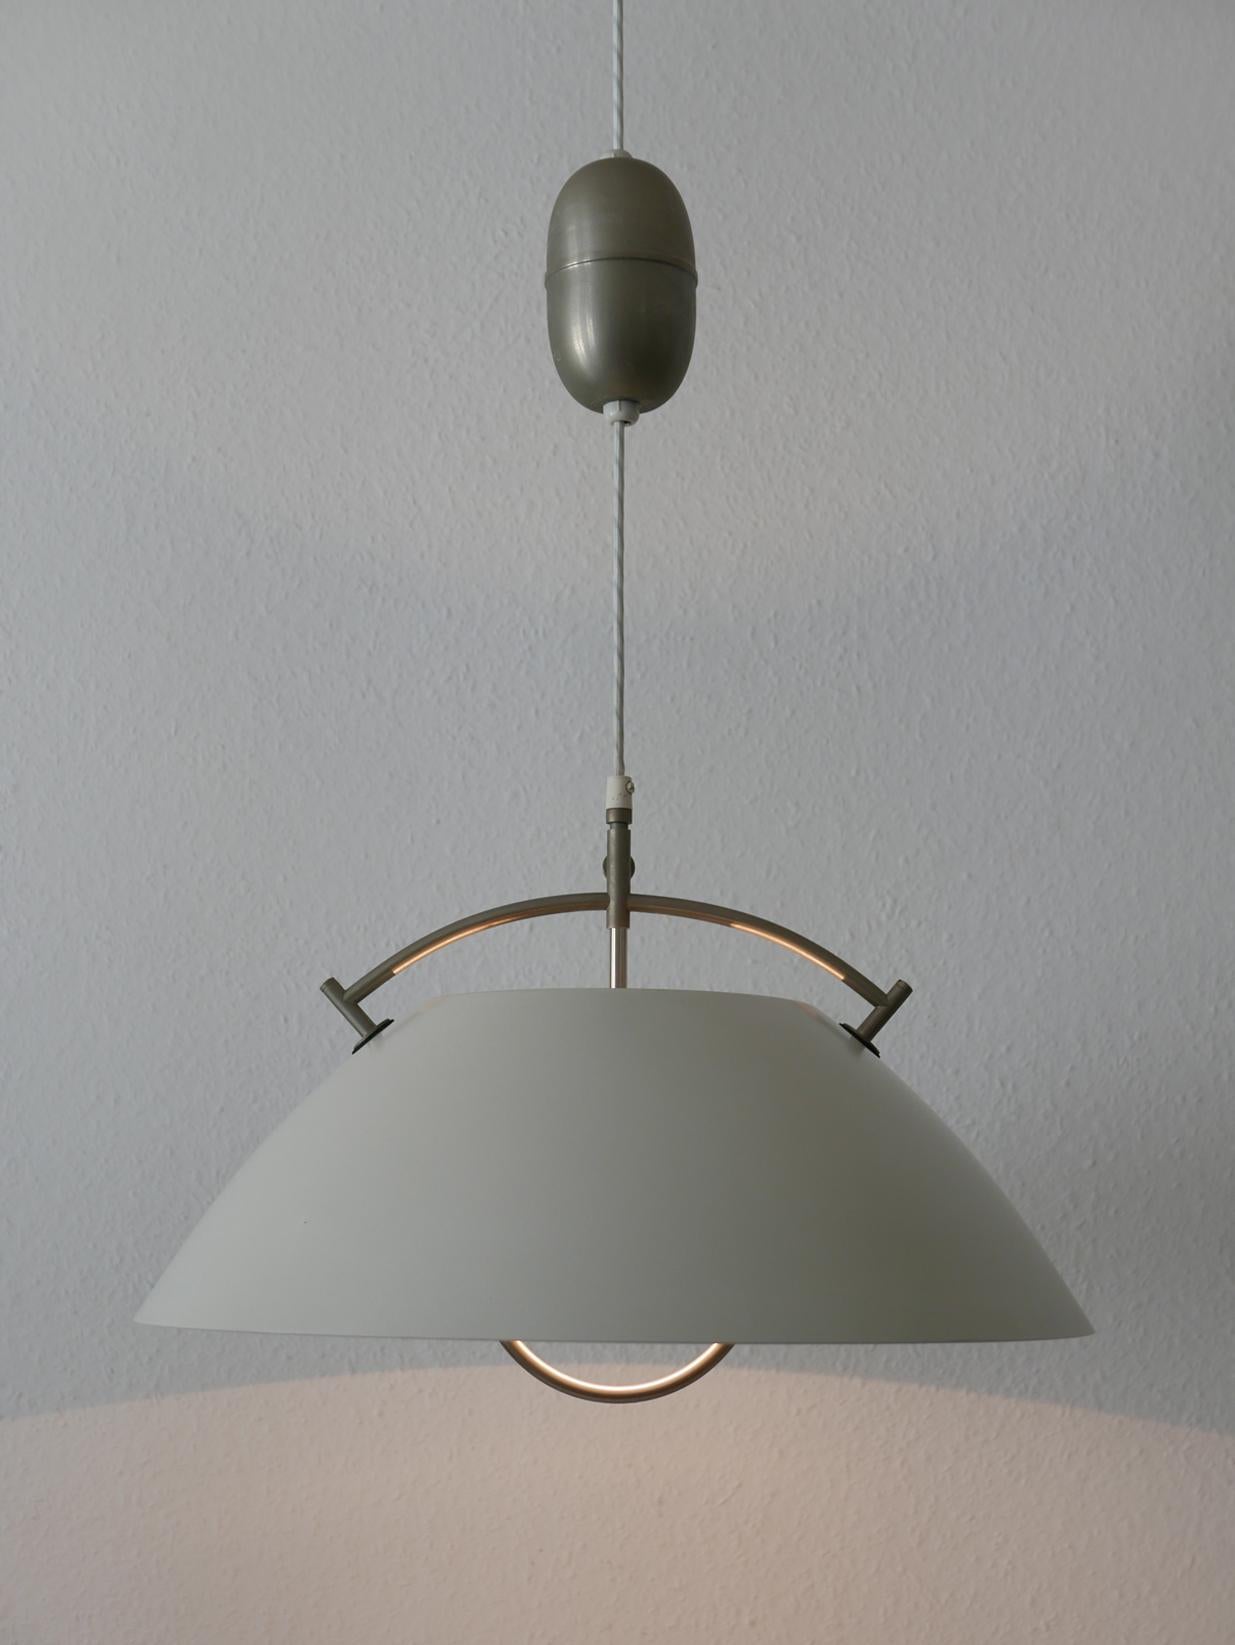 Rare, original Mid-Century Modern JH 604 pendant lamp with pulley. Designed by Hans Wegner, 1962. Manufactured by Louis Poulsen, 1960s, Denmark. Marked with makers mark.

A total of three identical lamps with pulley available!

All executed in white